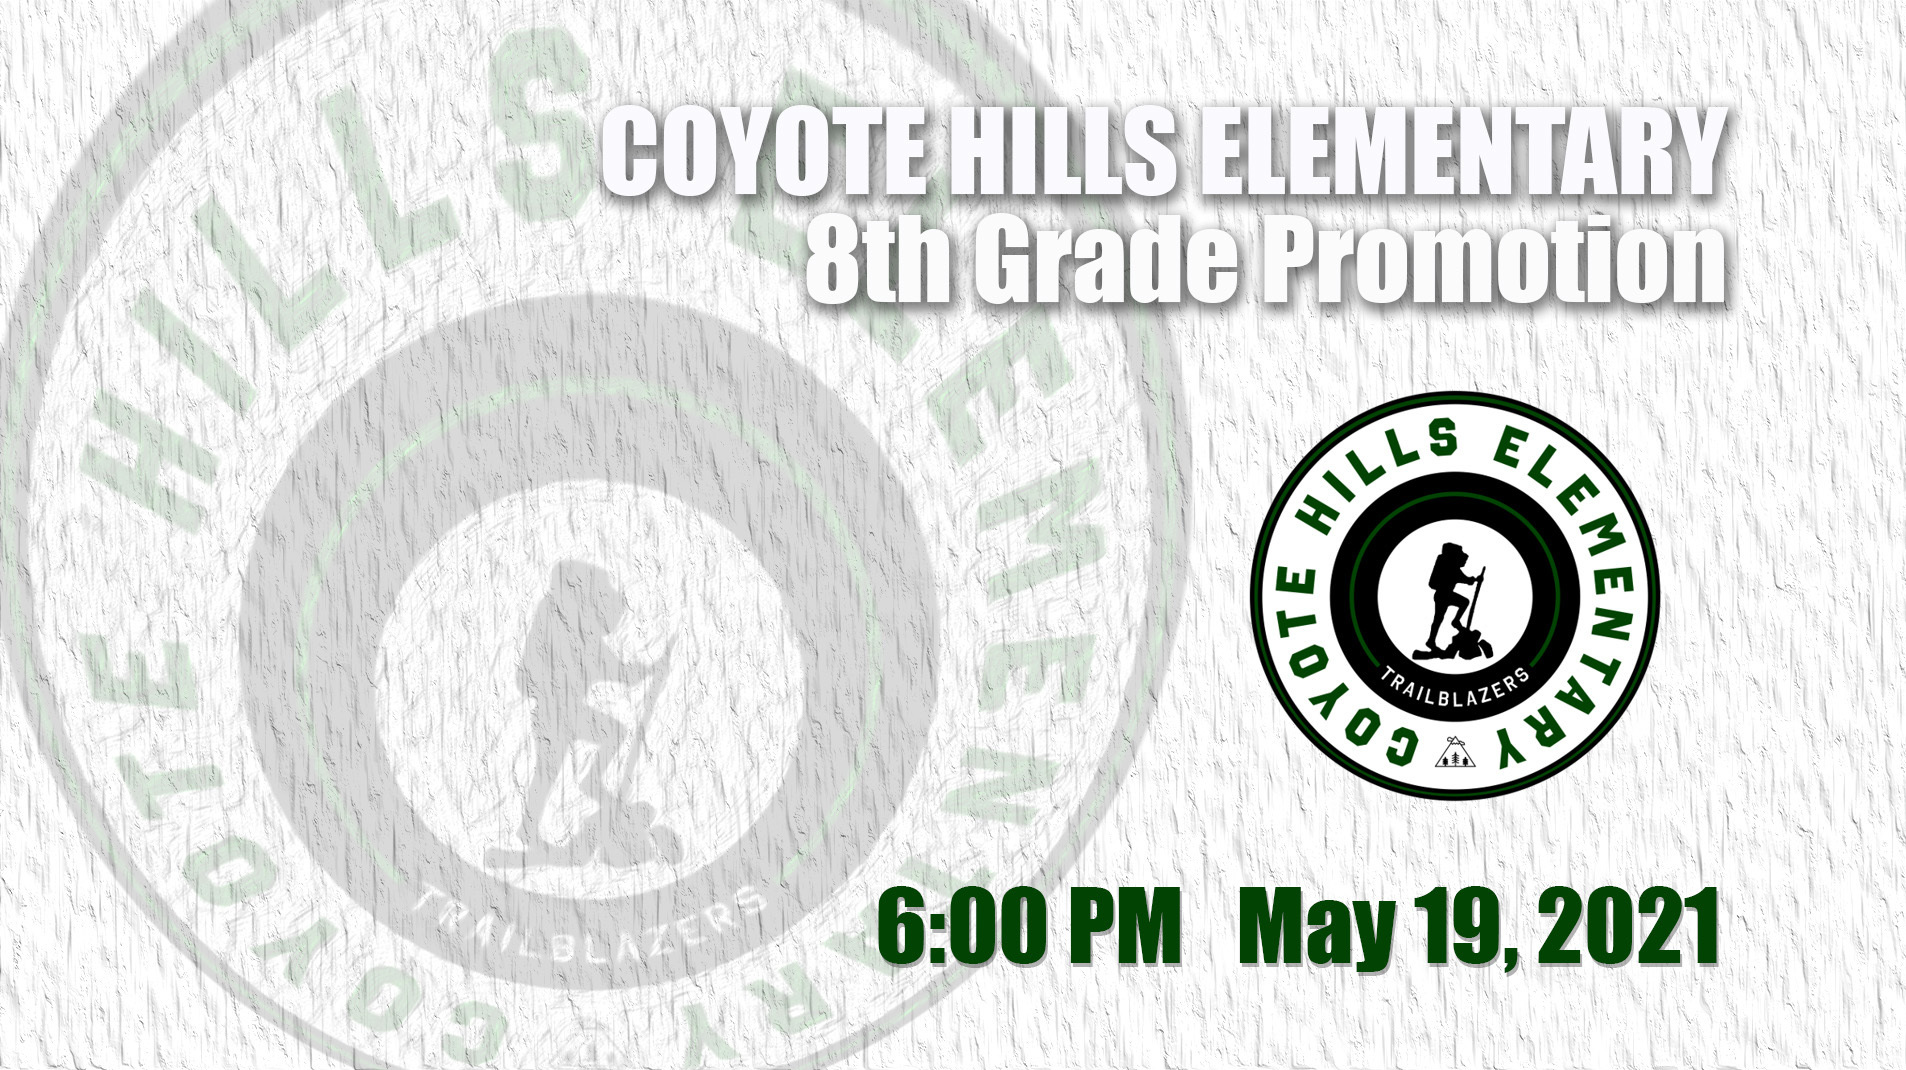 Coyote Hills Elementary 8th Grade Promotion 2021 on Livestream